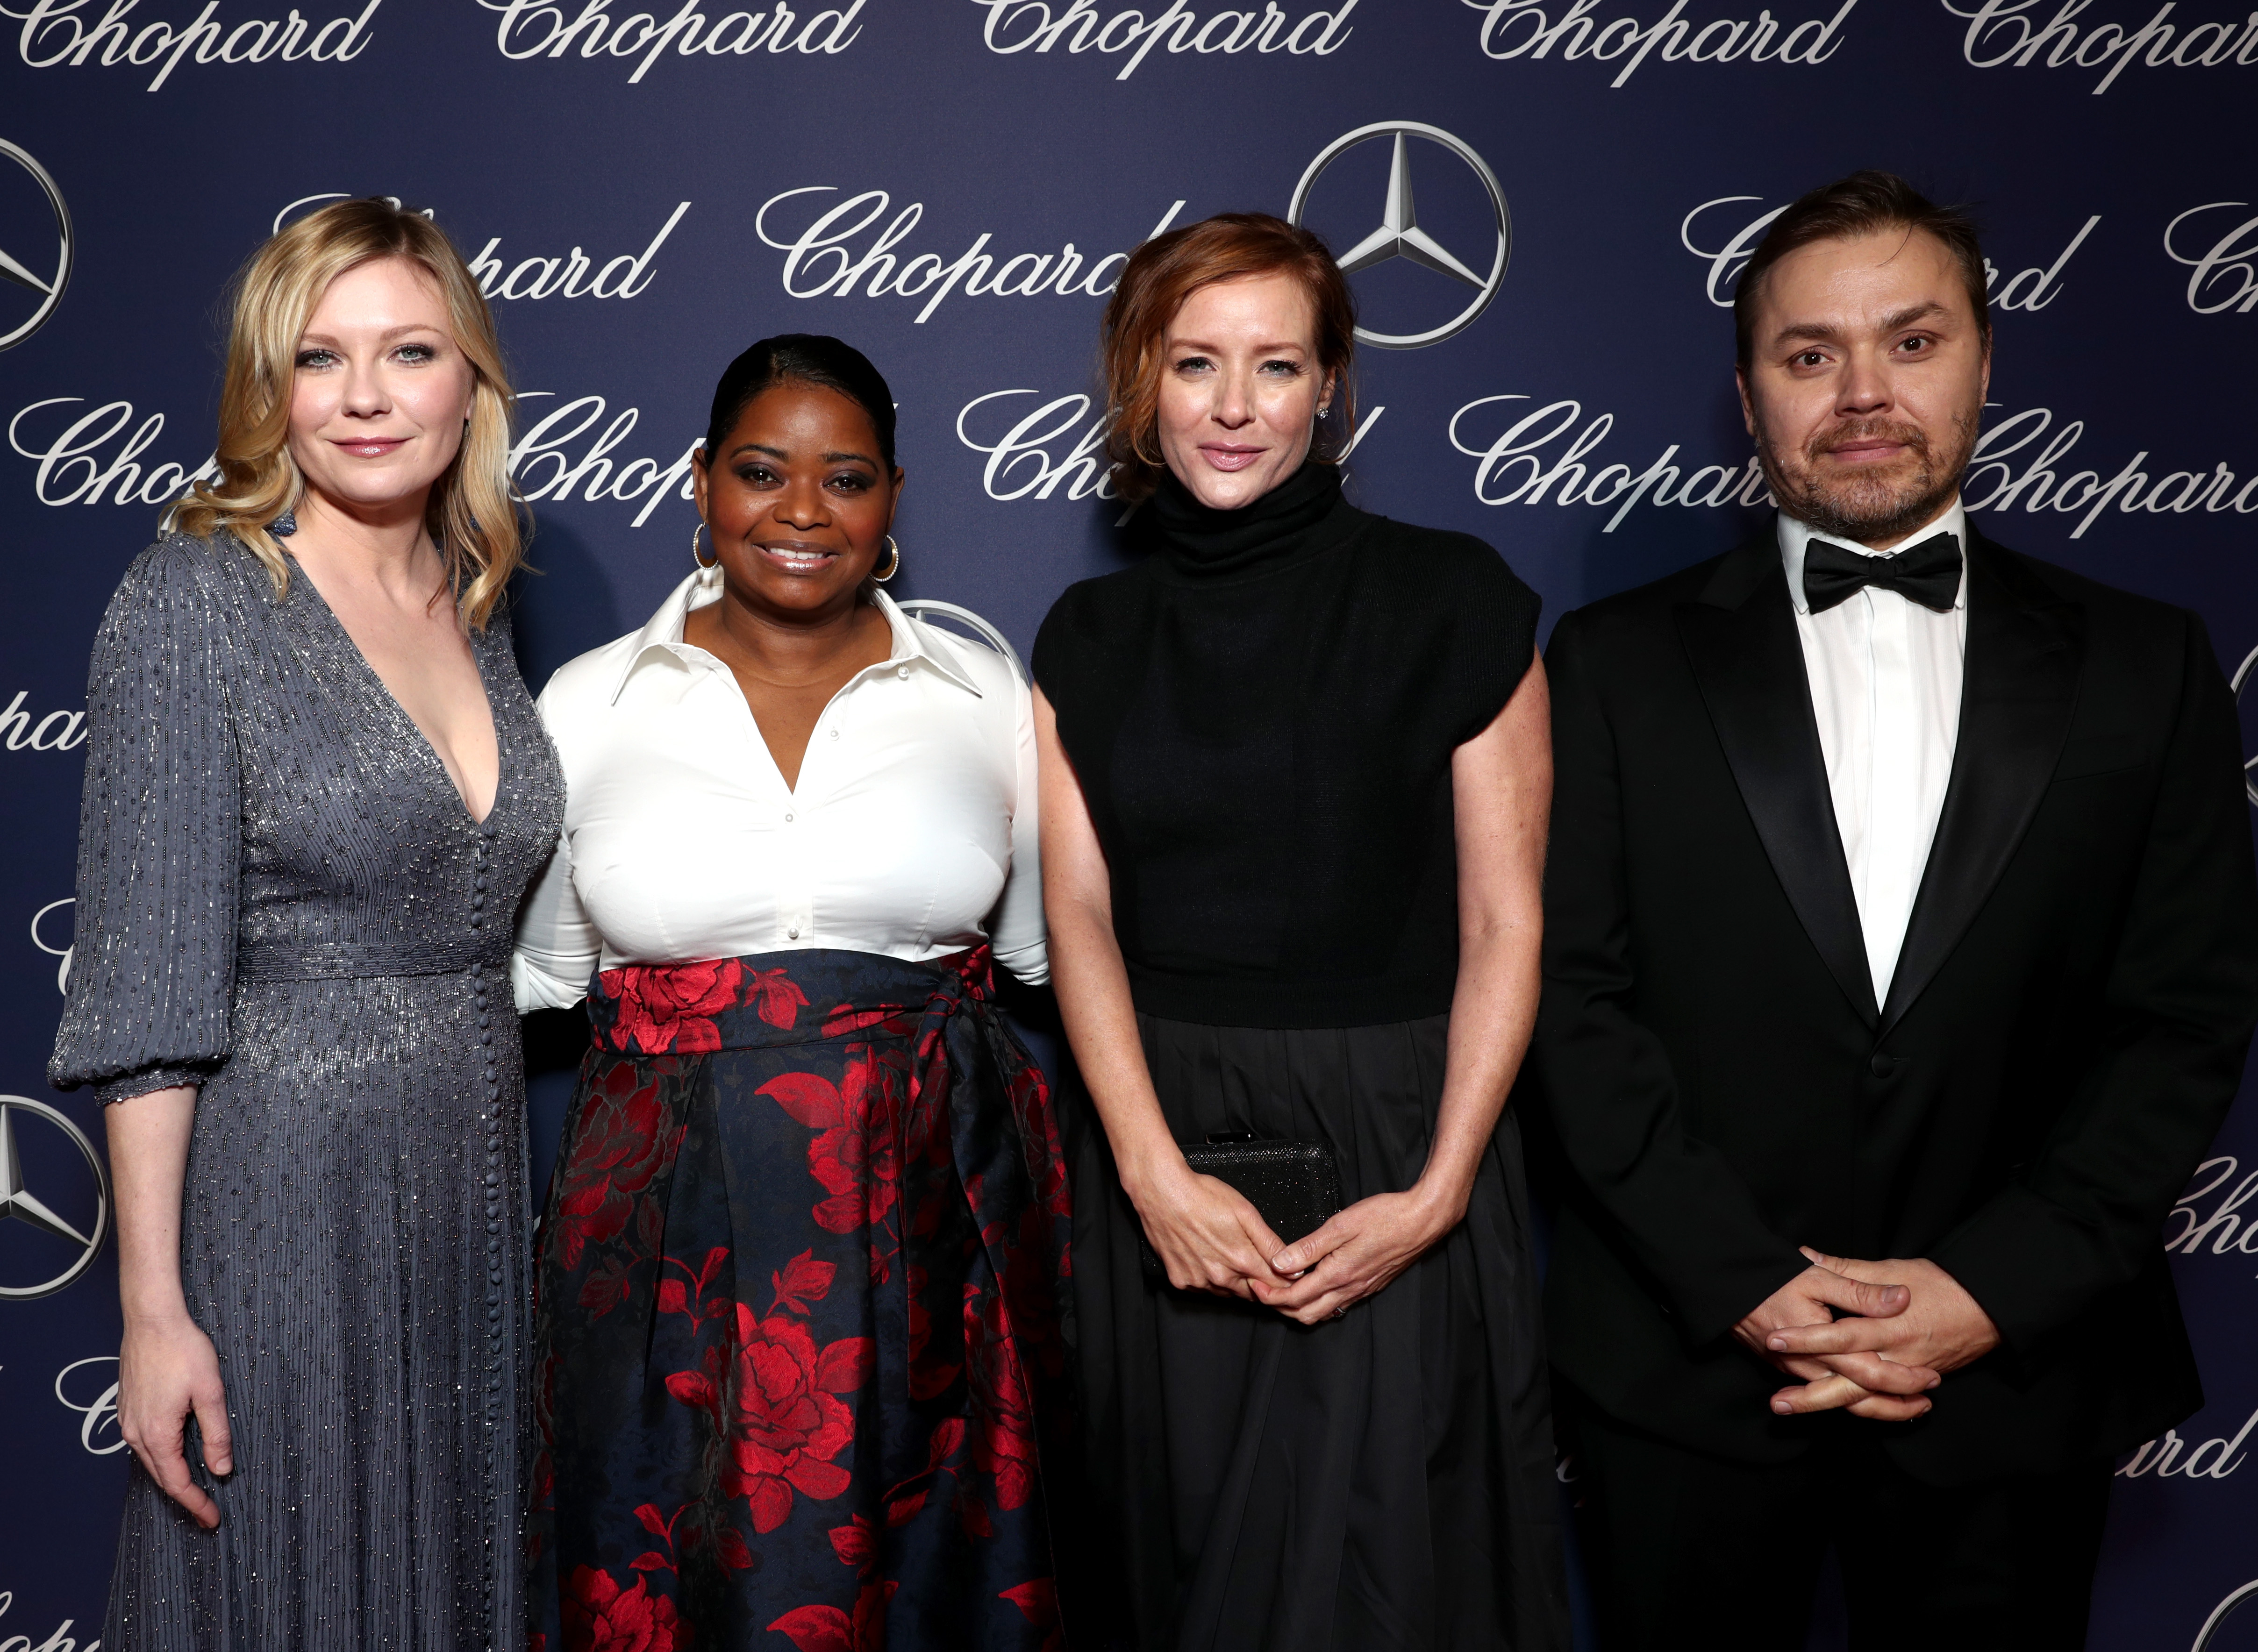 PALM SPRINGS, CA - JANUARY 02: (L-R) Actresses Kirsten Dunst, Octavia Spencer, Kimberly Quinn and director Theodore Melfi attend the 28th Annual Palm Springs International Film Festival Film Awards Gala at the Palm Springs Convention Center on January 2, 2017 in Palm Springs, California. (Photo by Todd Williamson/Getty Images for Palm Springs International Film Festival)